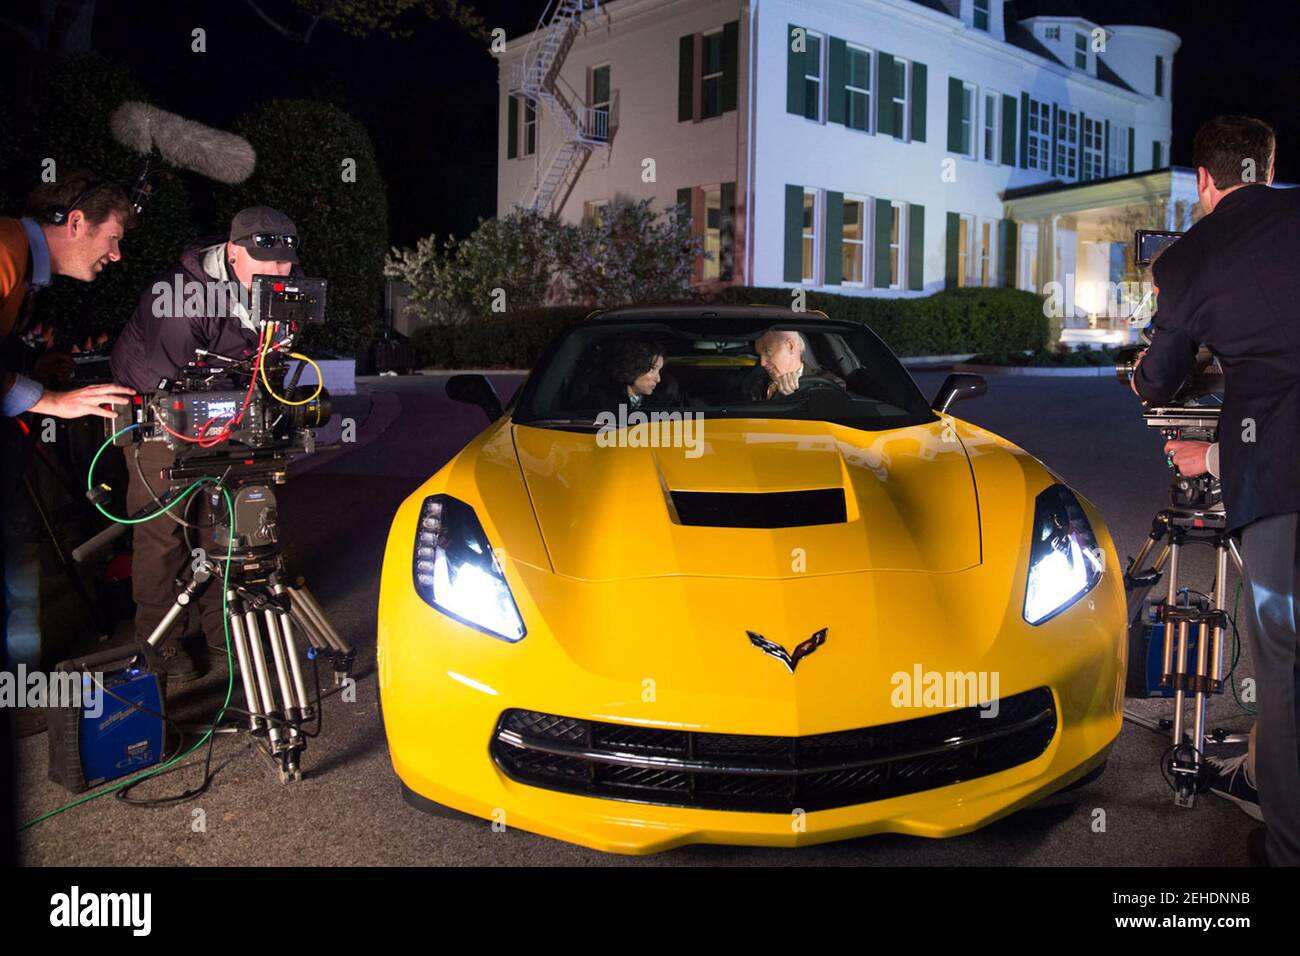 April 23, 2014 'David Lienemann captured the filming of a scene from the HBO show 'Veep' with the real Vice President and the TV Vice President, actress Julia Louis-Dreyfus, near the gate at the Naval Observatory Residence in Washington, D.C.' Stock Photo